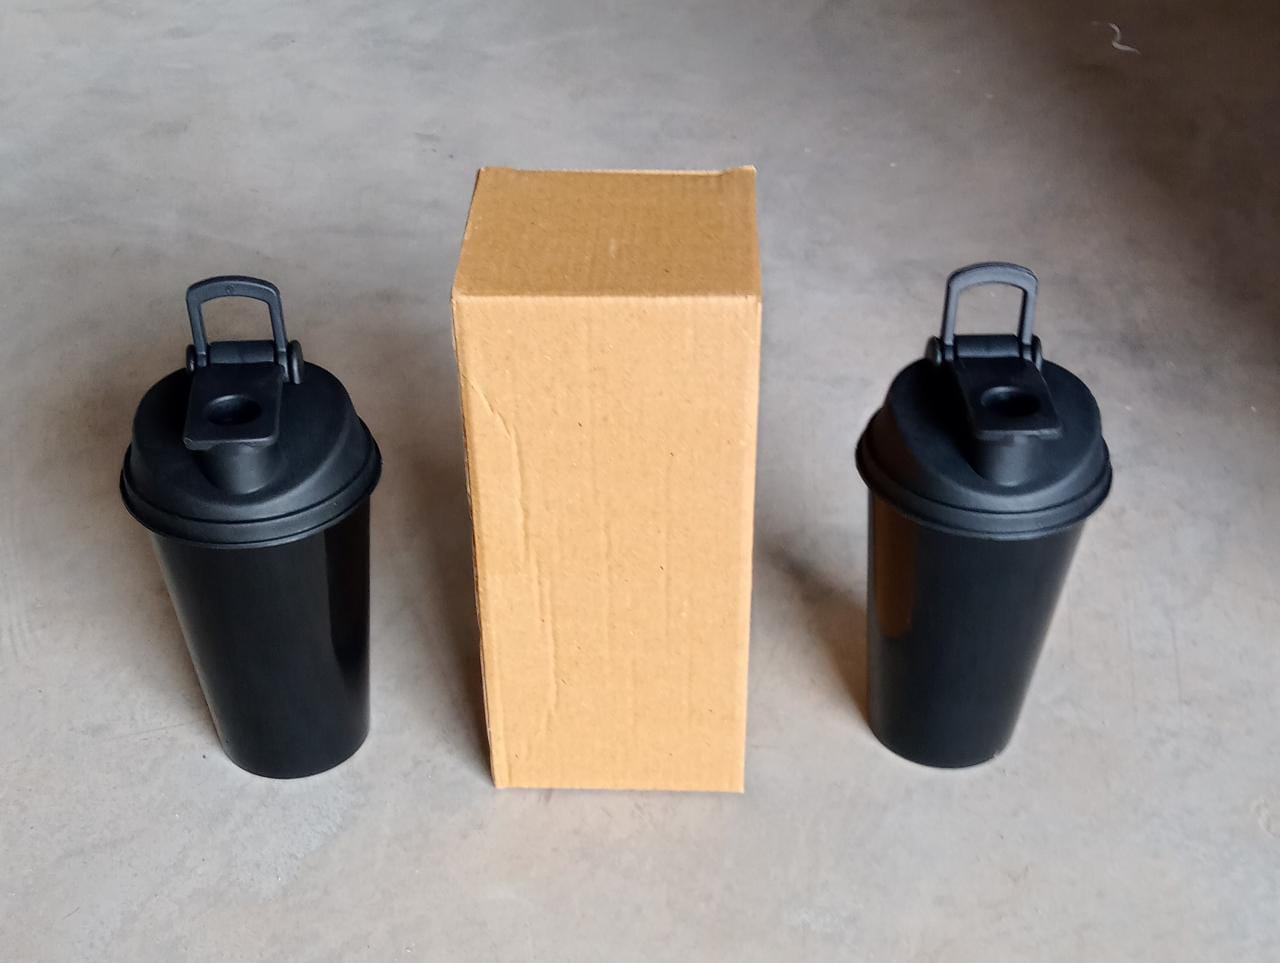 4899 Shaker Bottle Perfect for Protein Shakes and Pre Workout Gym